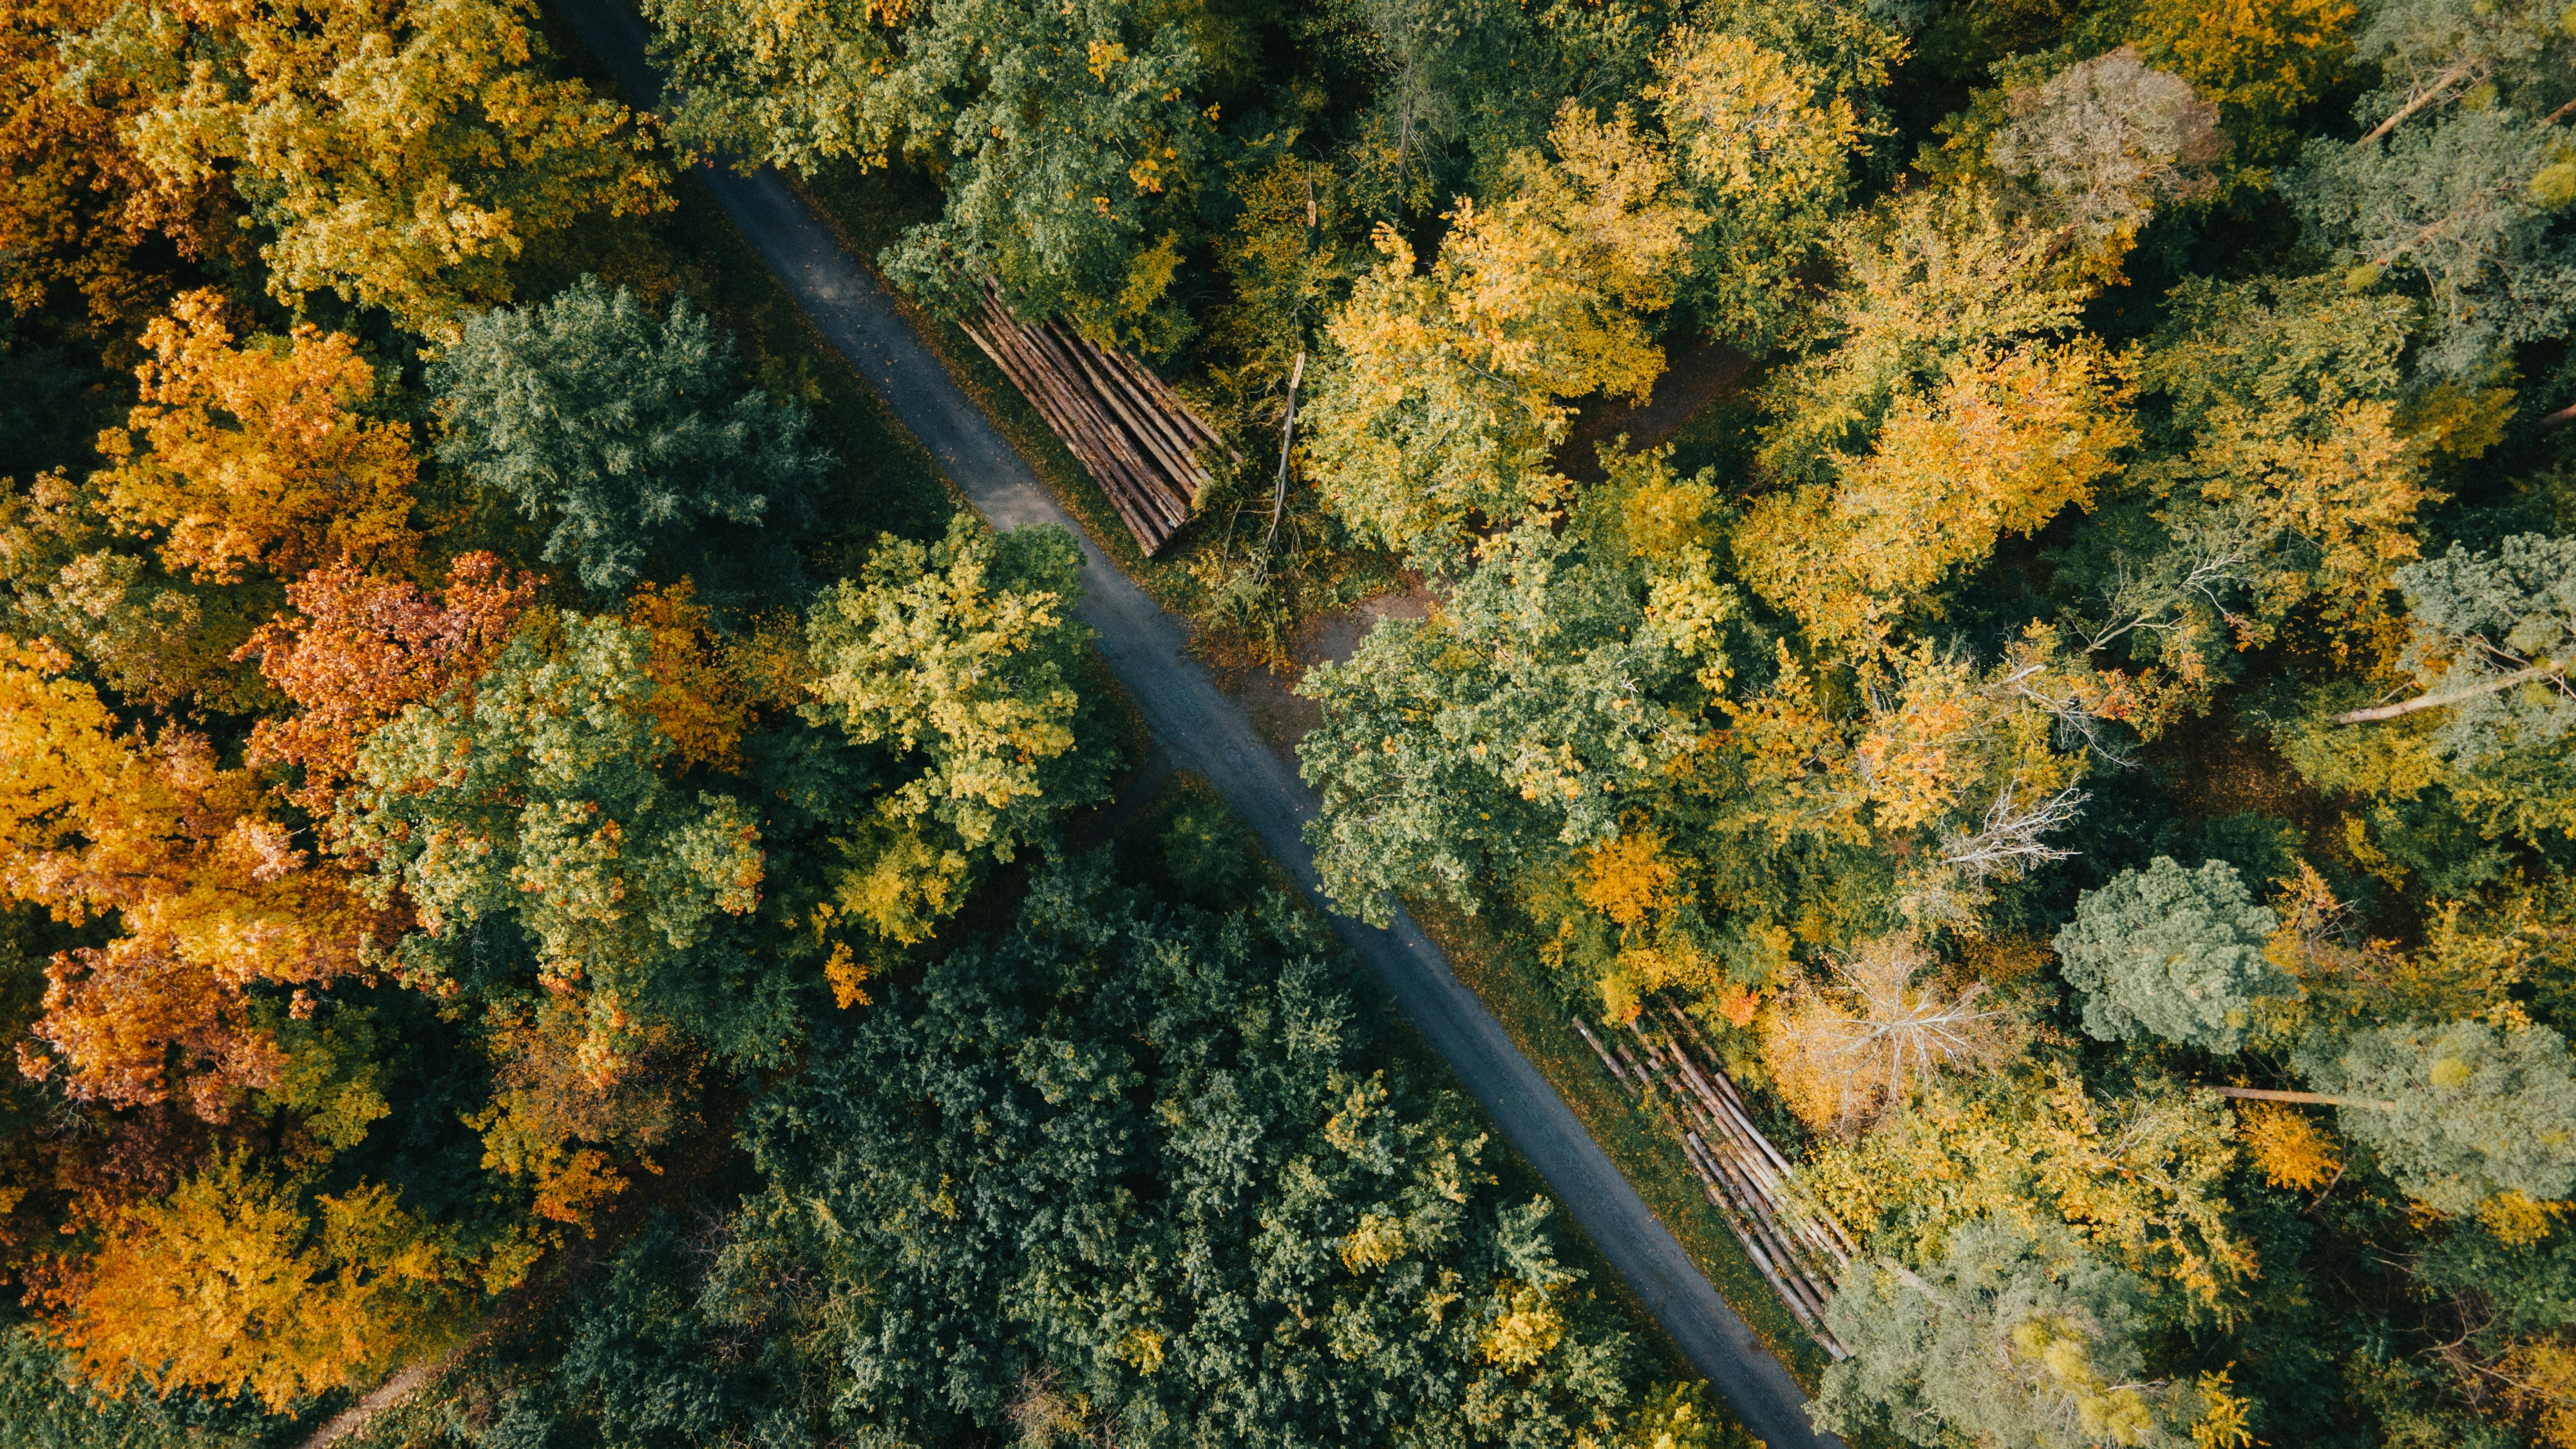 Nature Road Asphalt Trees Fall Wood Plants Drone Photo Aerial View Germany Pascal Scholl 4000x2250